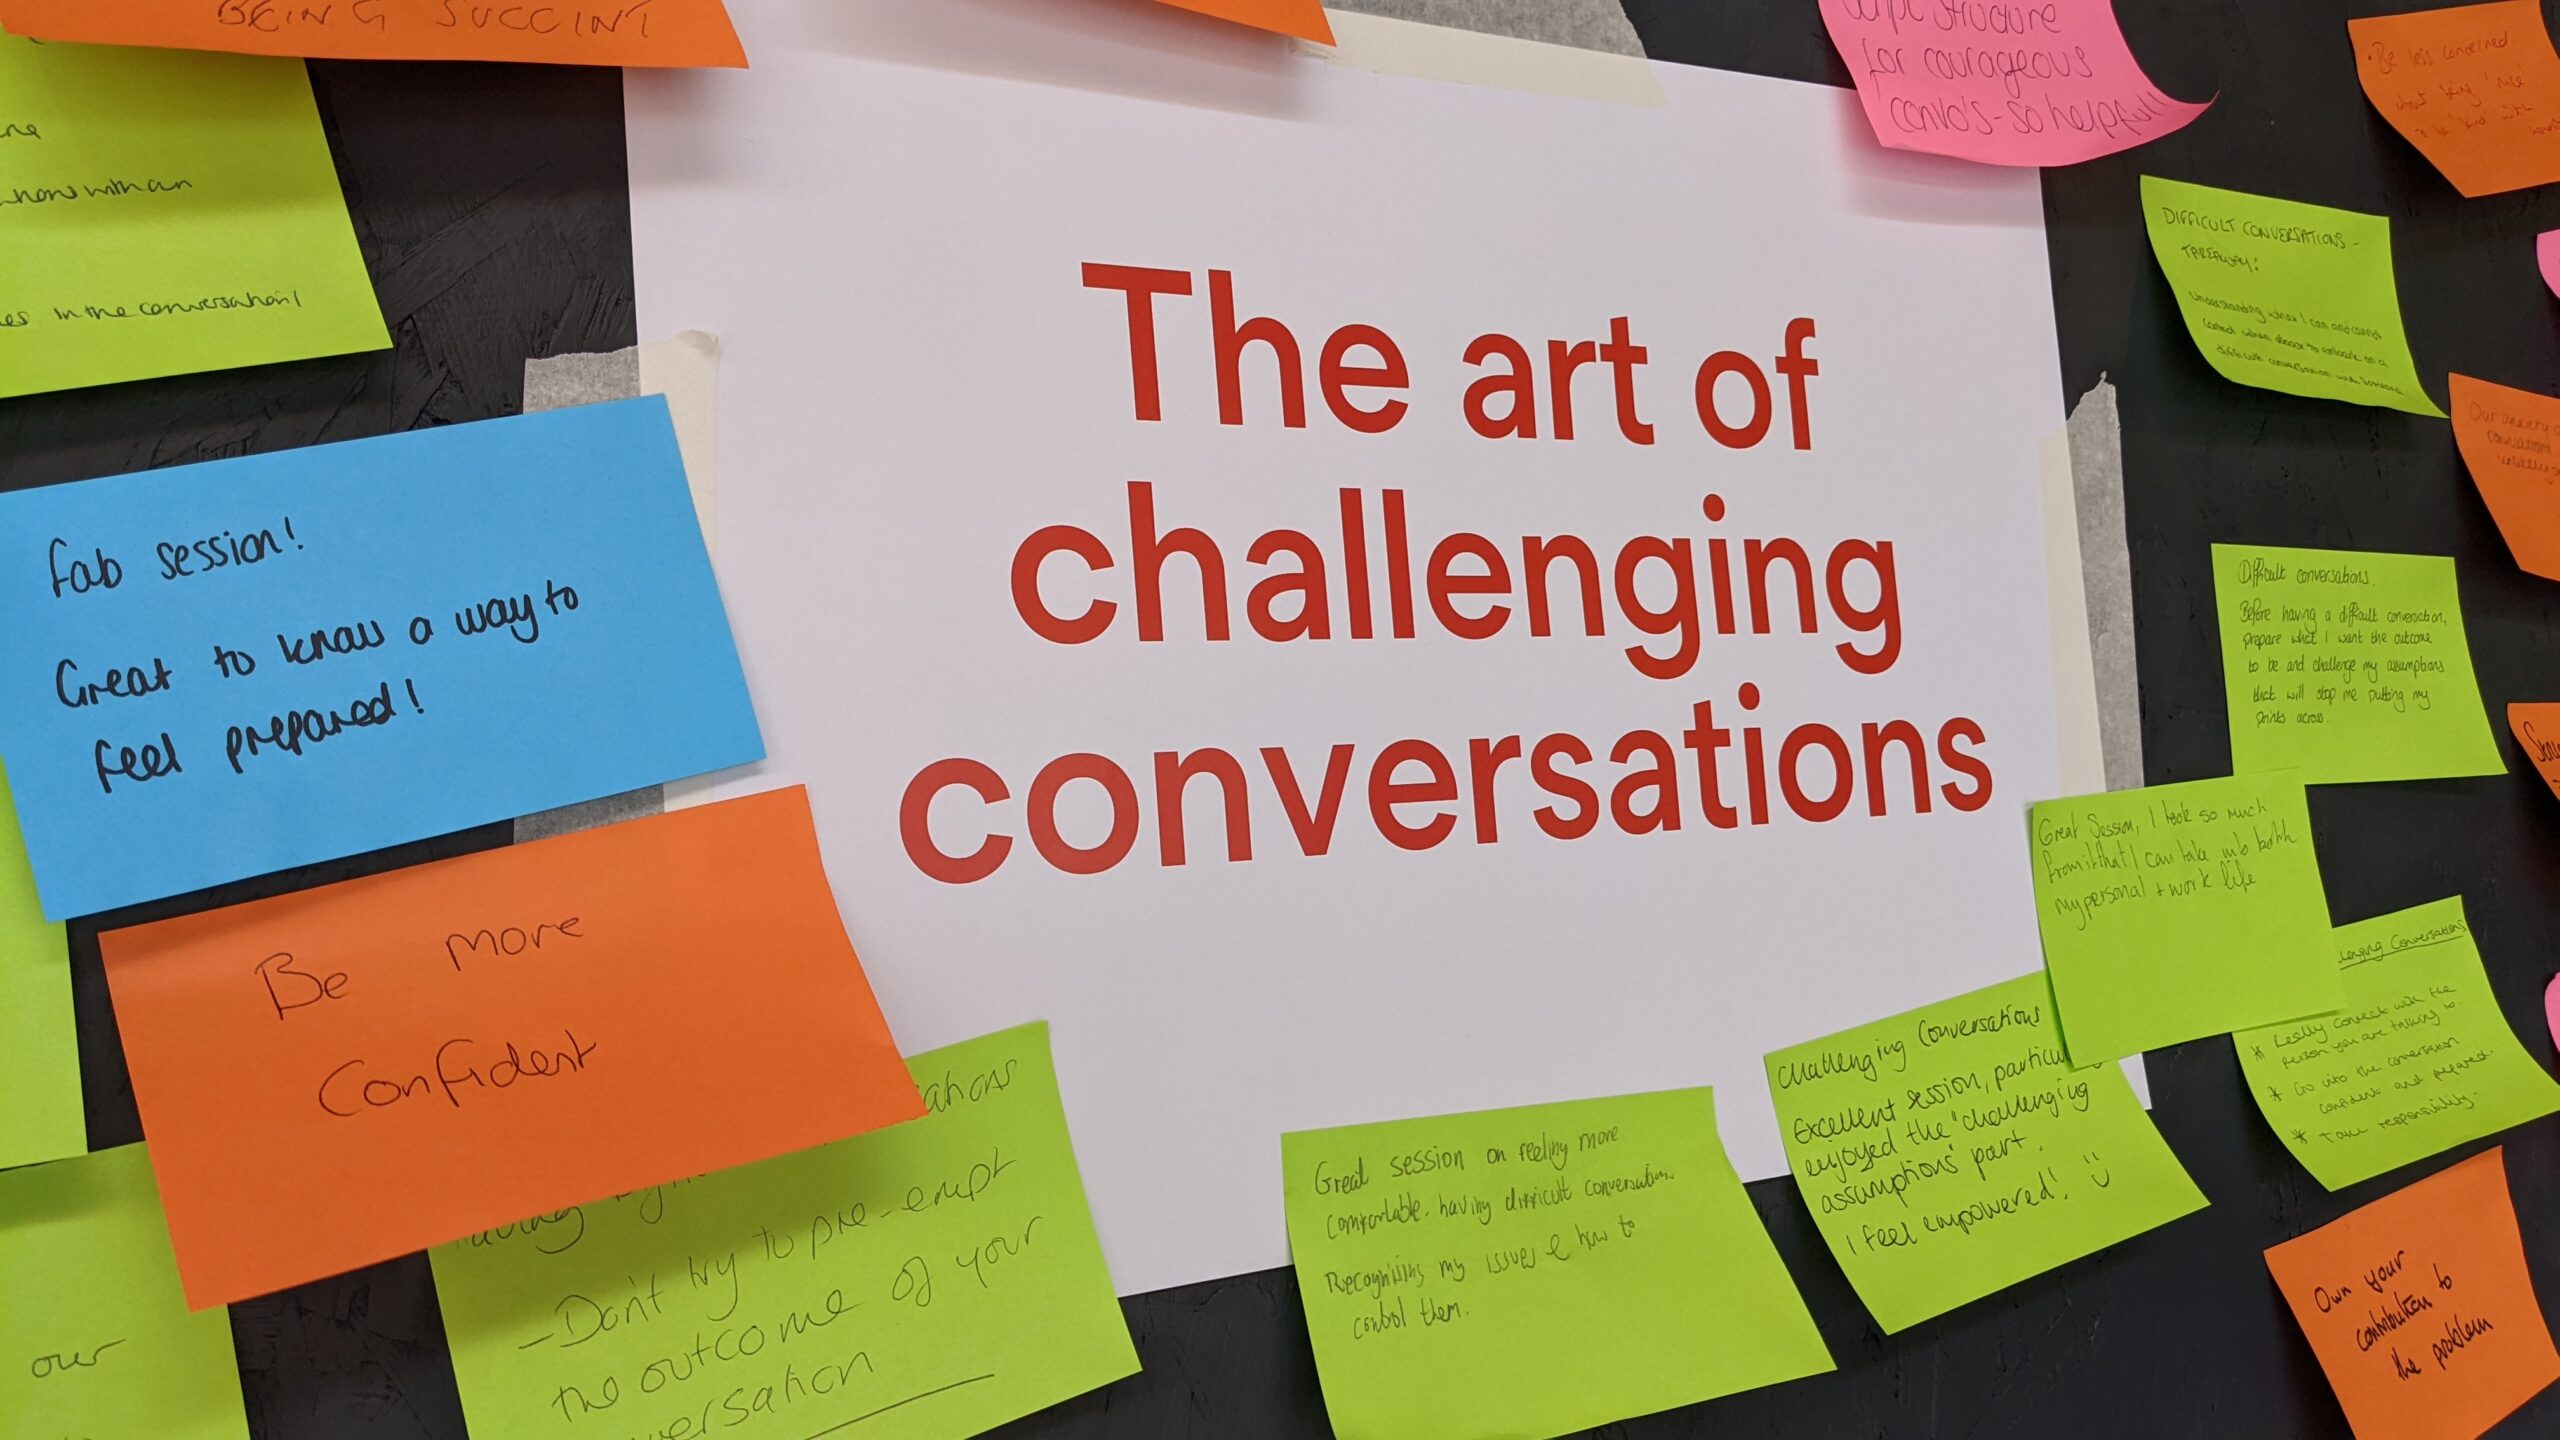 The phrase 'The art of challenging conversations' is placed at the centre of the image and is surrounded by multi-coloured post-it notes with handwritten observations and comments added by participants in the workshop session